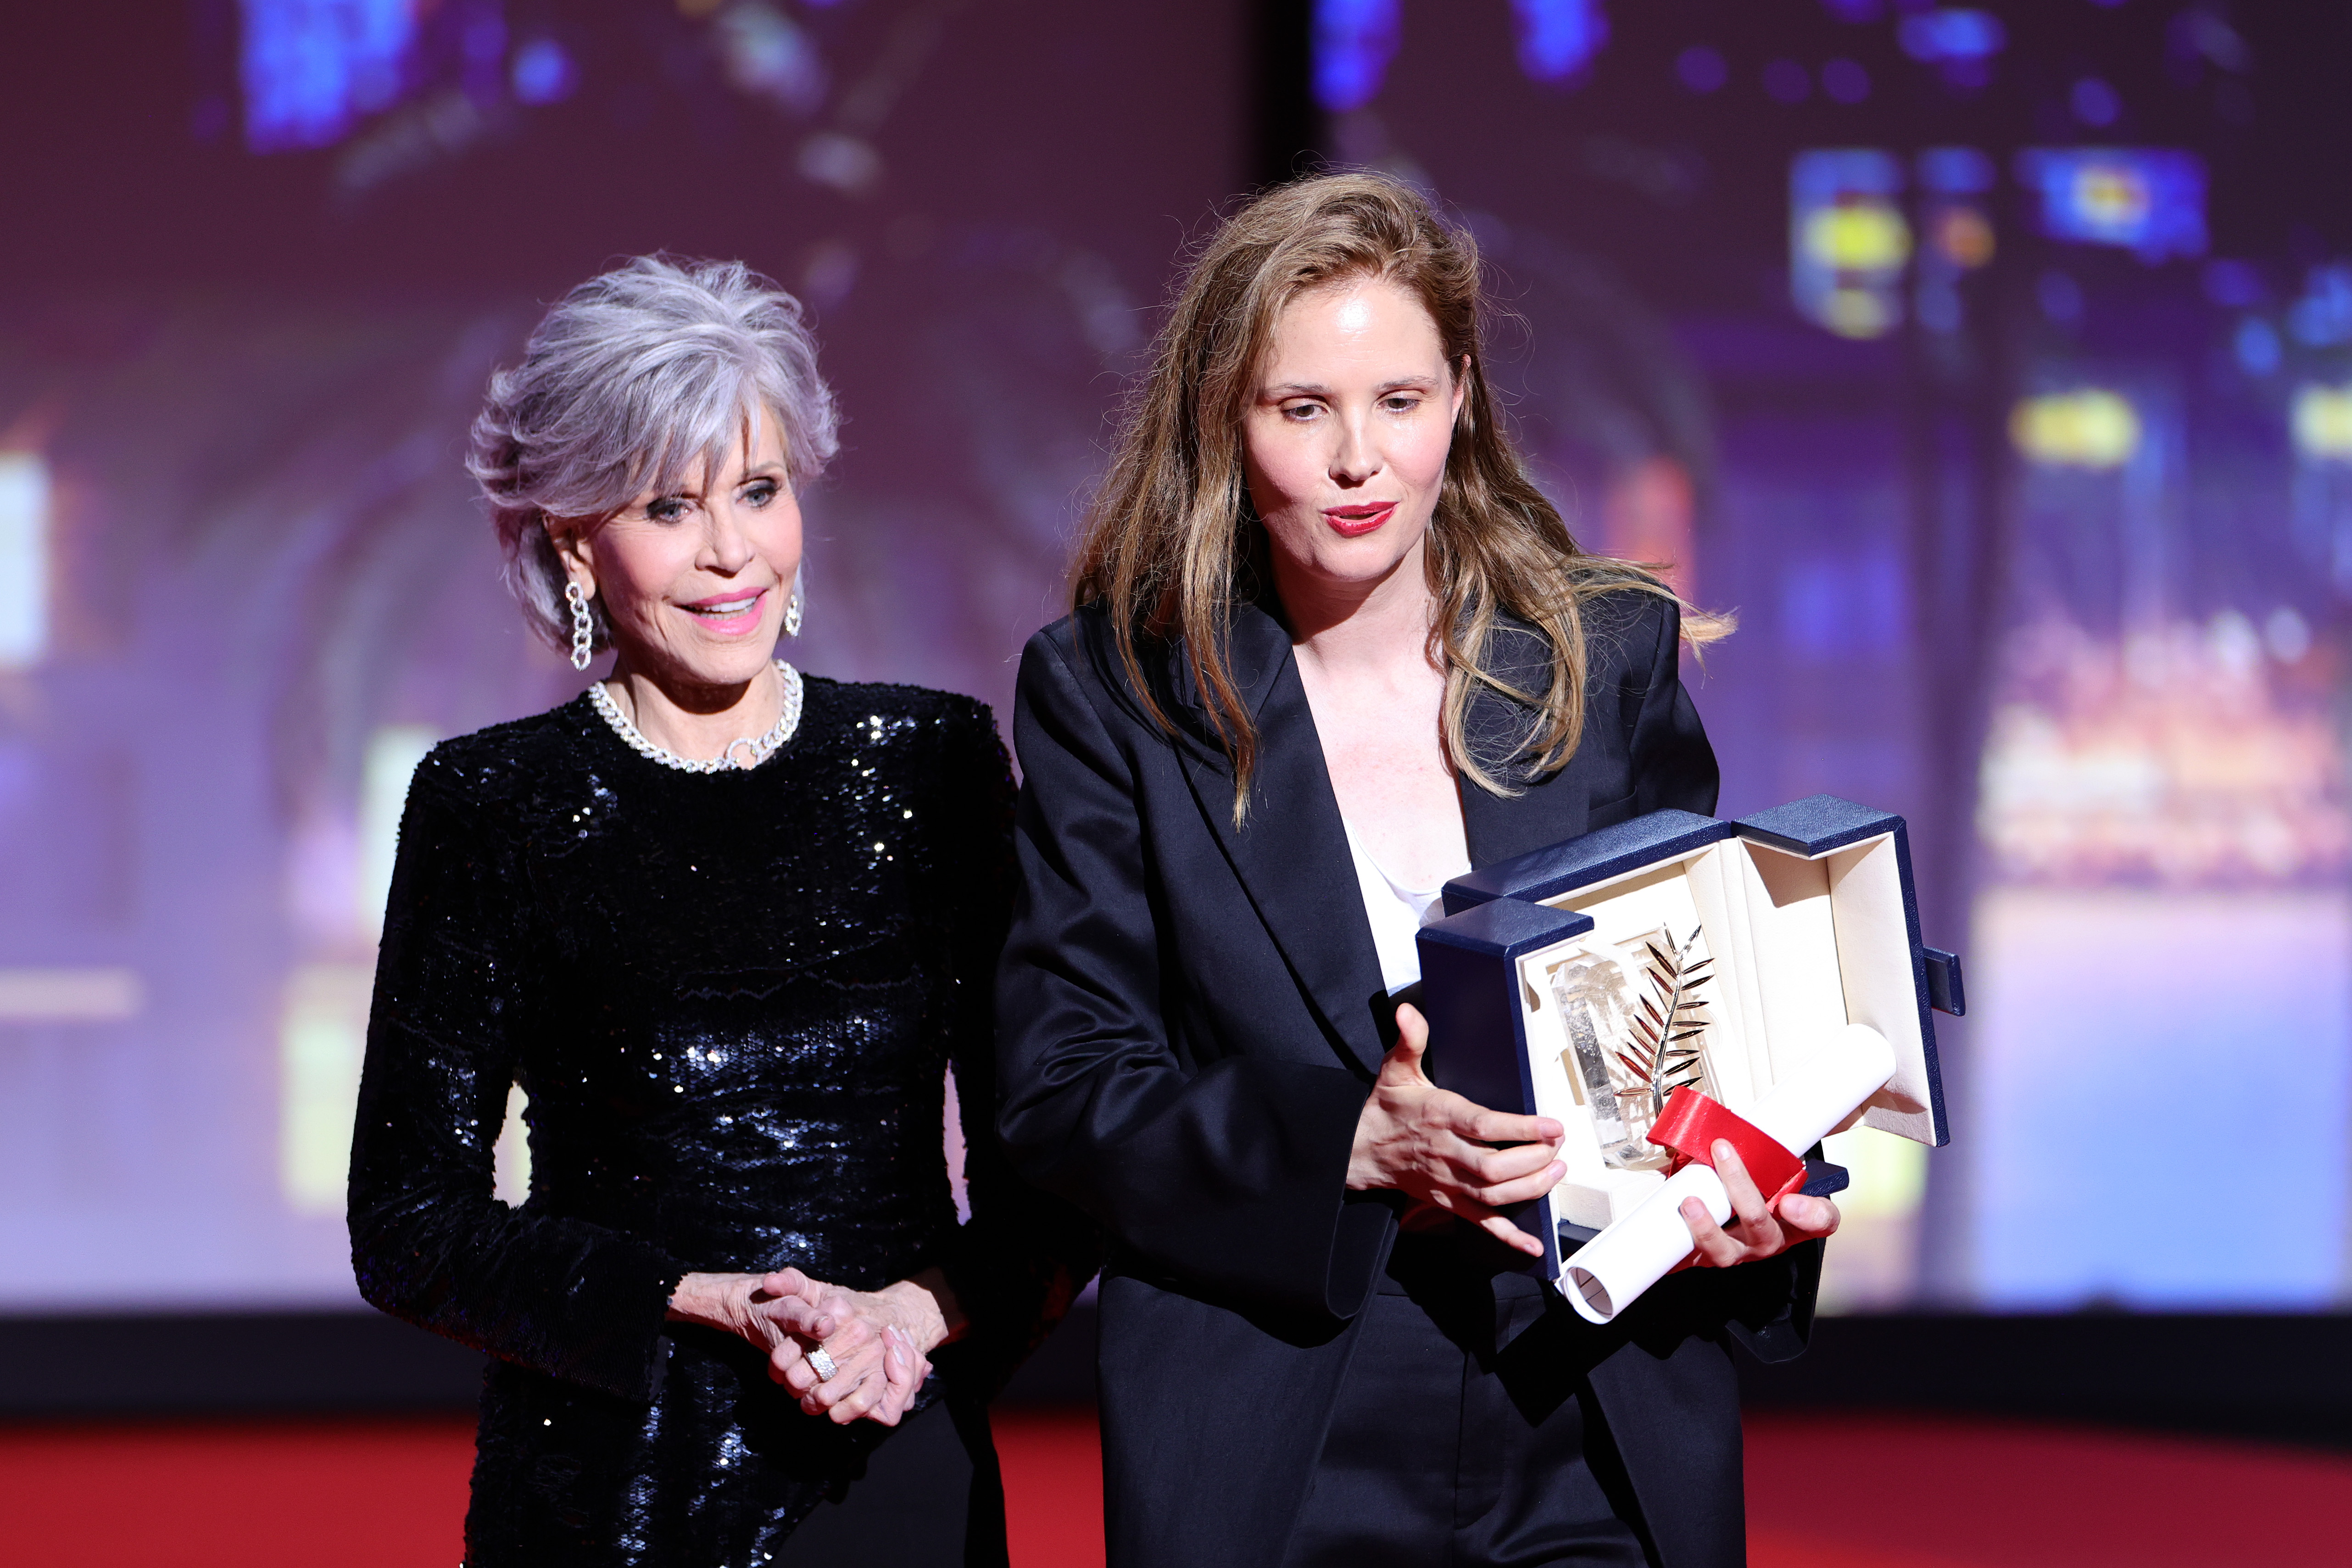 Justine Triet receiving the Palme d'Or Award for "Anatomy of a Fall" from Jane Fonda during the 76th annual Cannes Film Festival at Palais des Festivals on May 27, 2023 in Cannes, France | Source: Getty Images